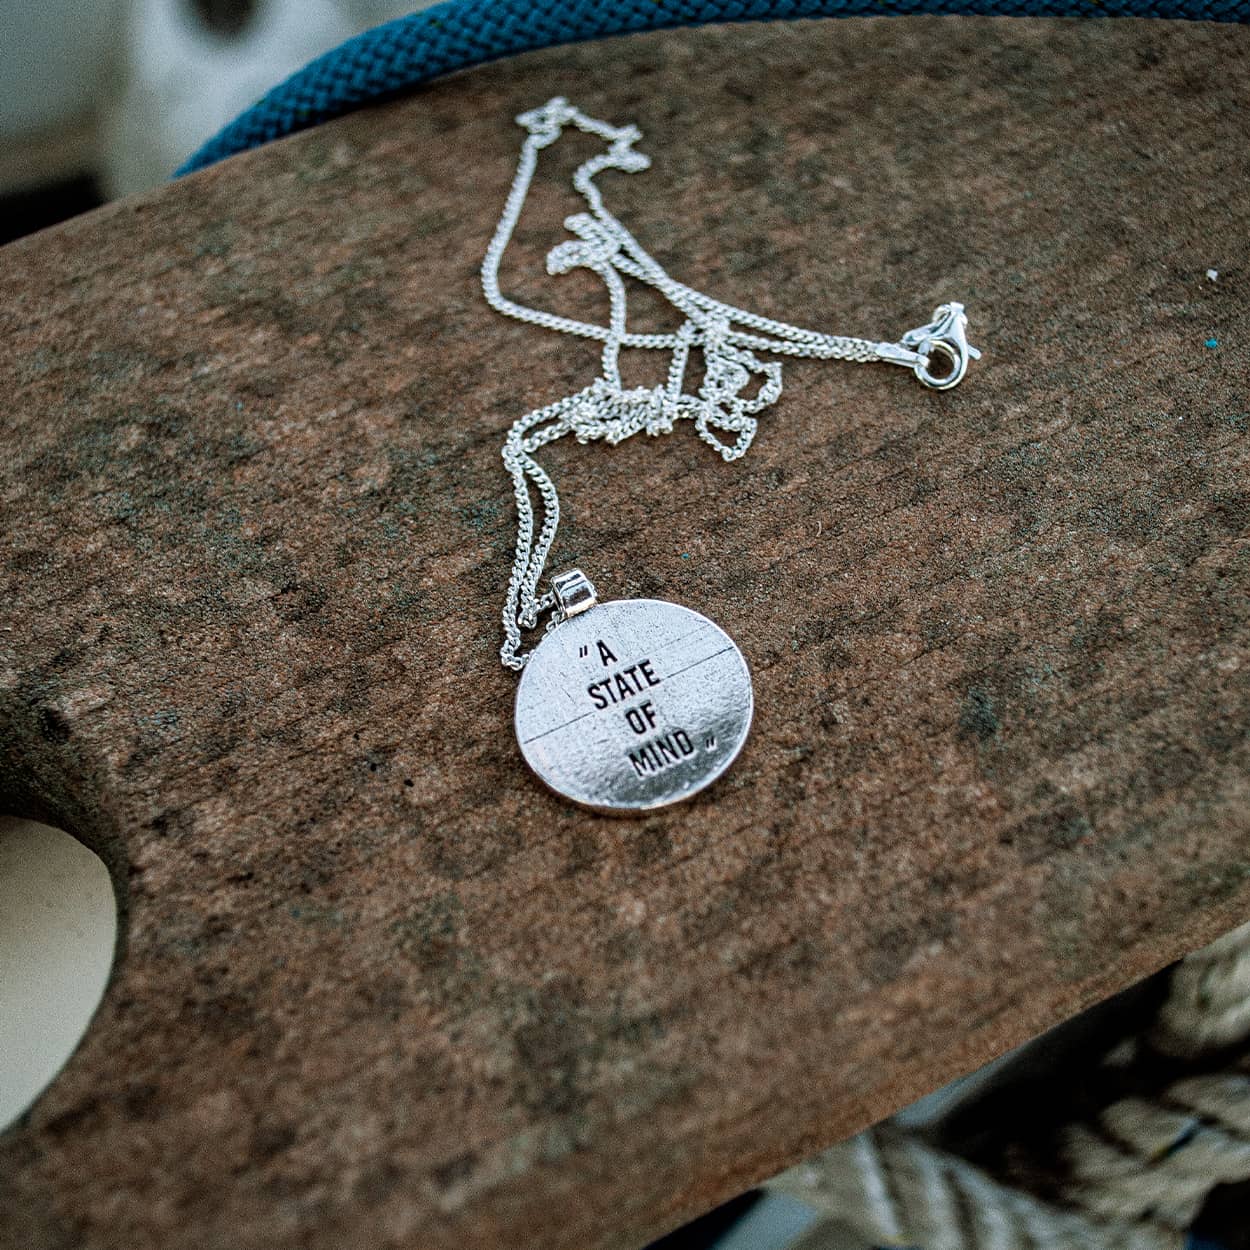 Atelier Domingo's State of Mind silver necklace is designed in France and made in Spain. This necklace is unisex, made for both men and women. The pendant is made of a high-quality 925 Sterling silver plating. The cuban chain is made of solid 925 Sterling silver.